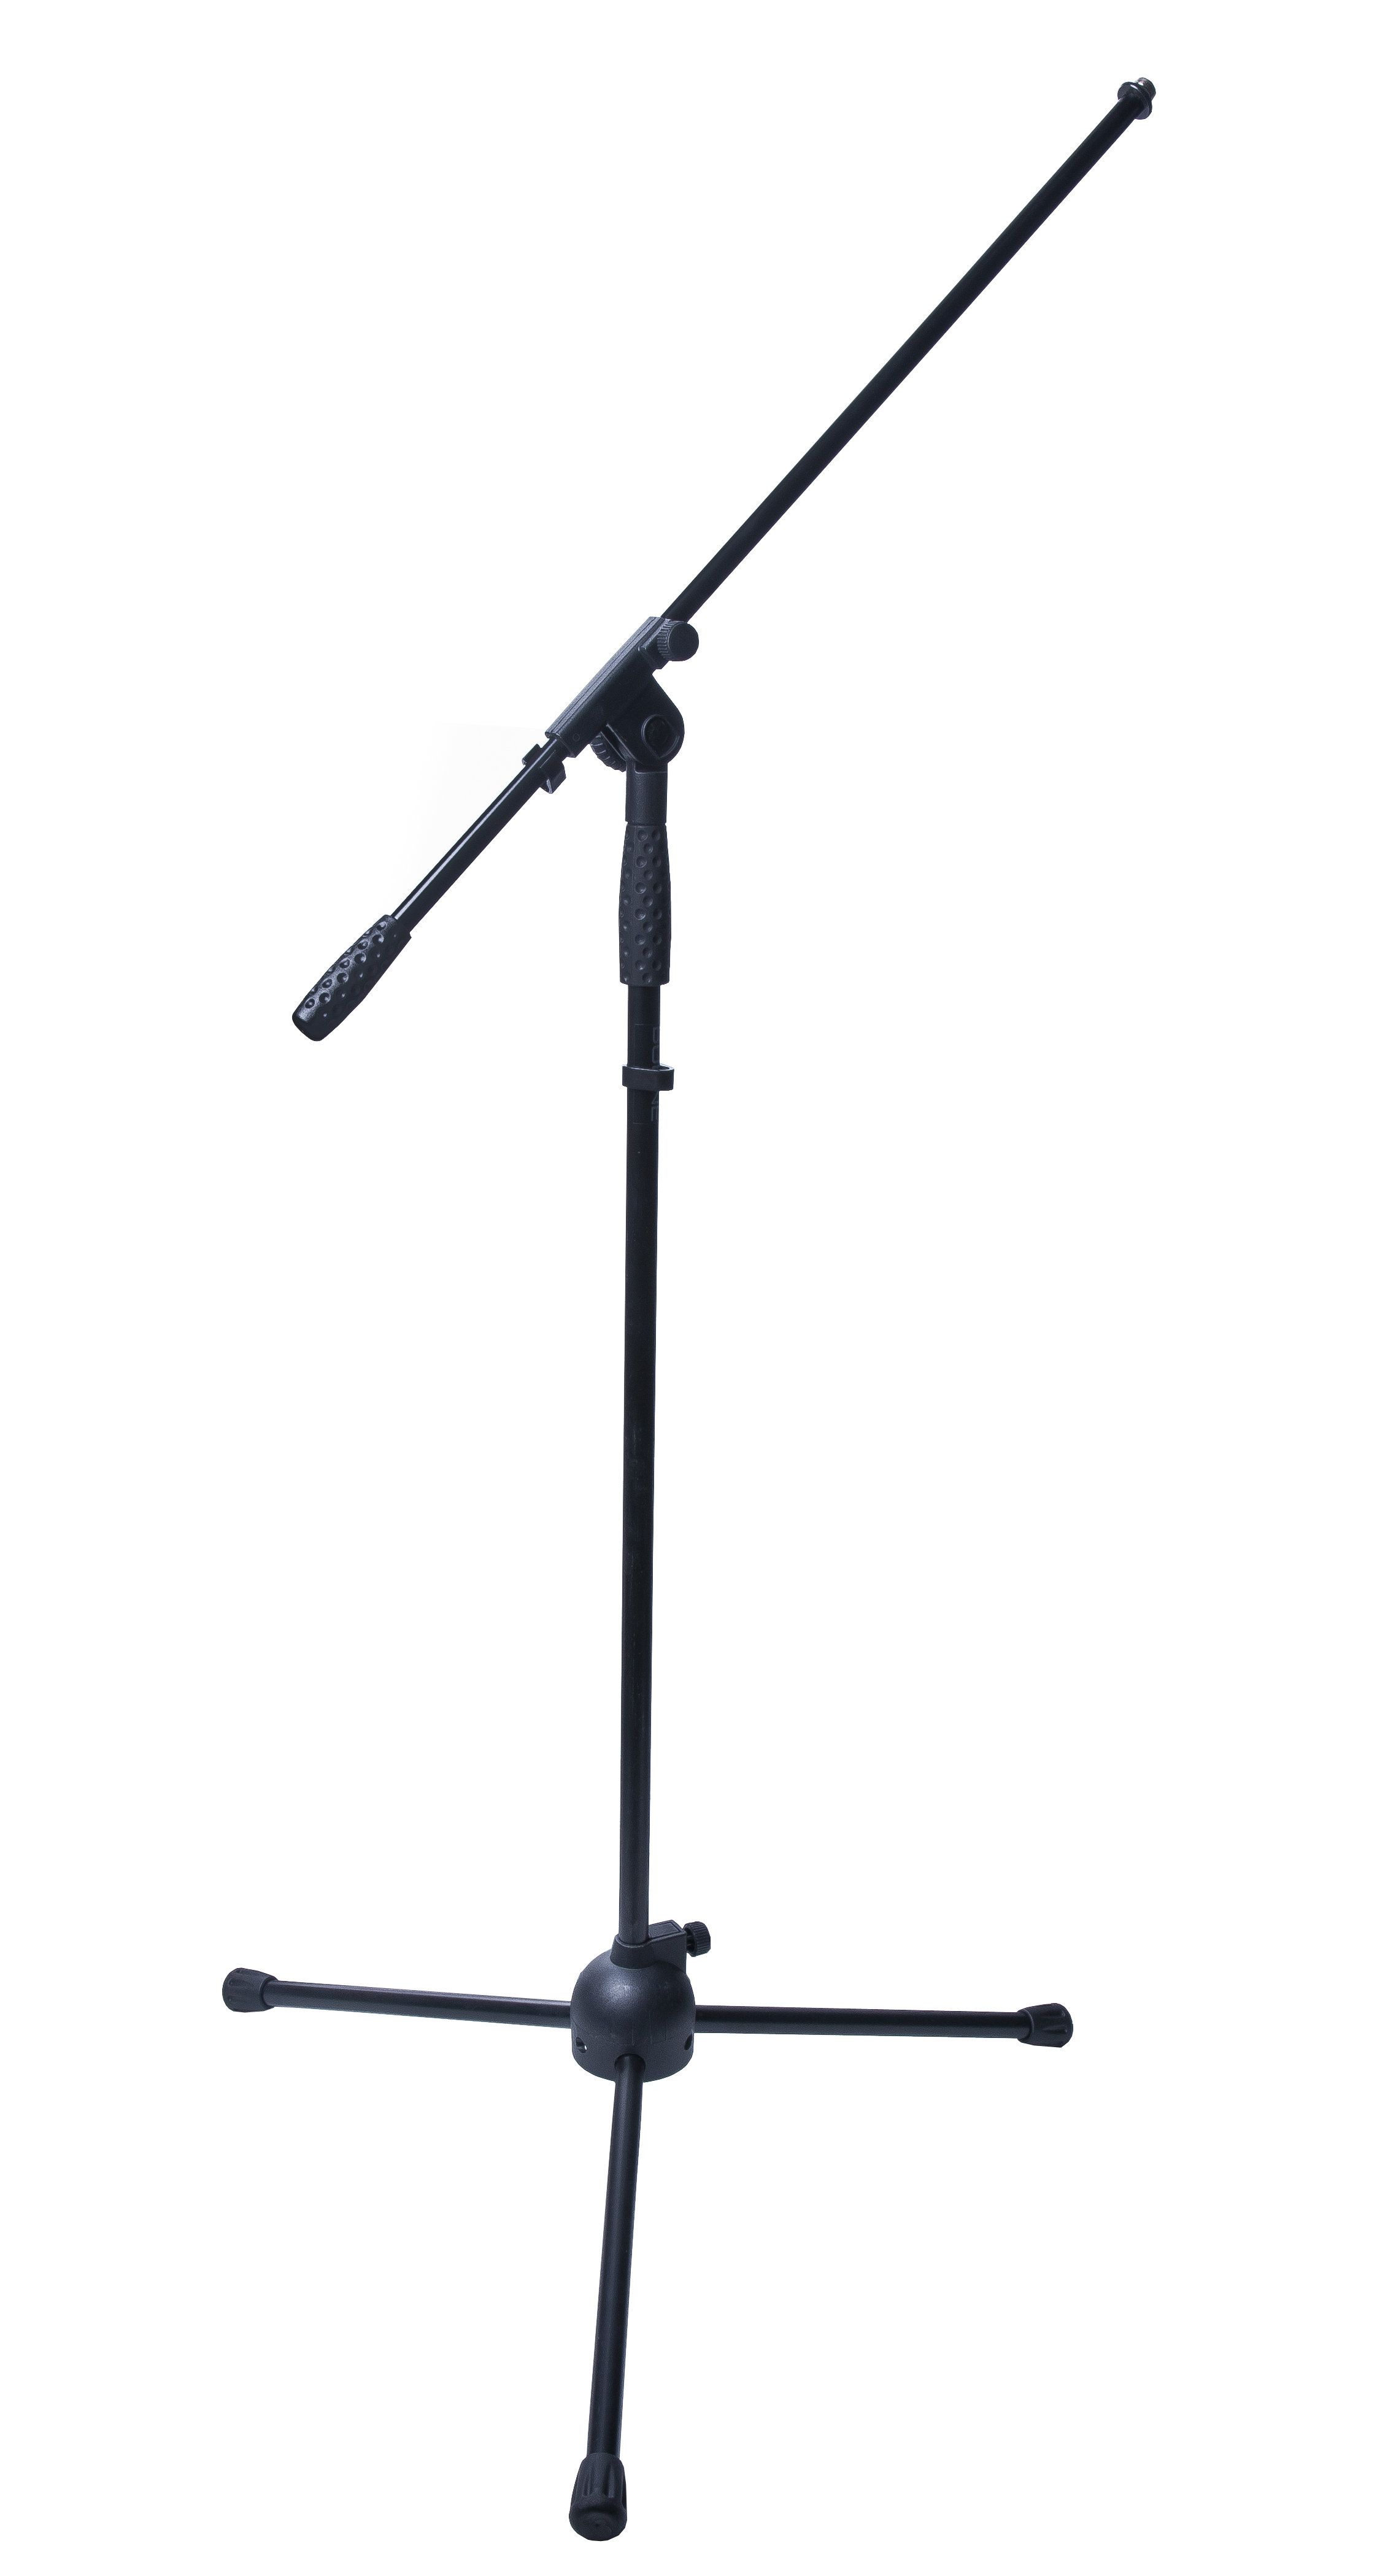 Shure SM58-LC Rugged Professional Studio Vocal Microphone, Cable Not Included - image 2 of 5